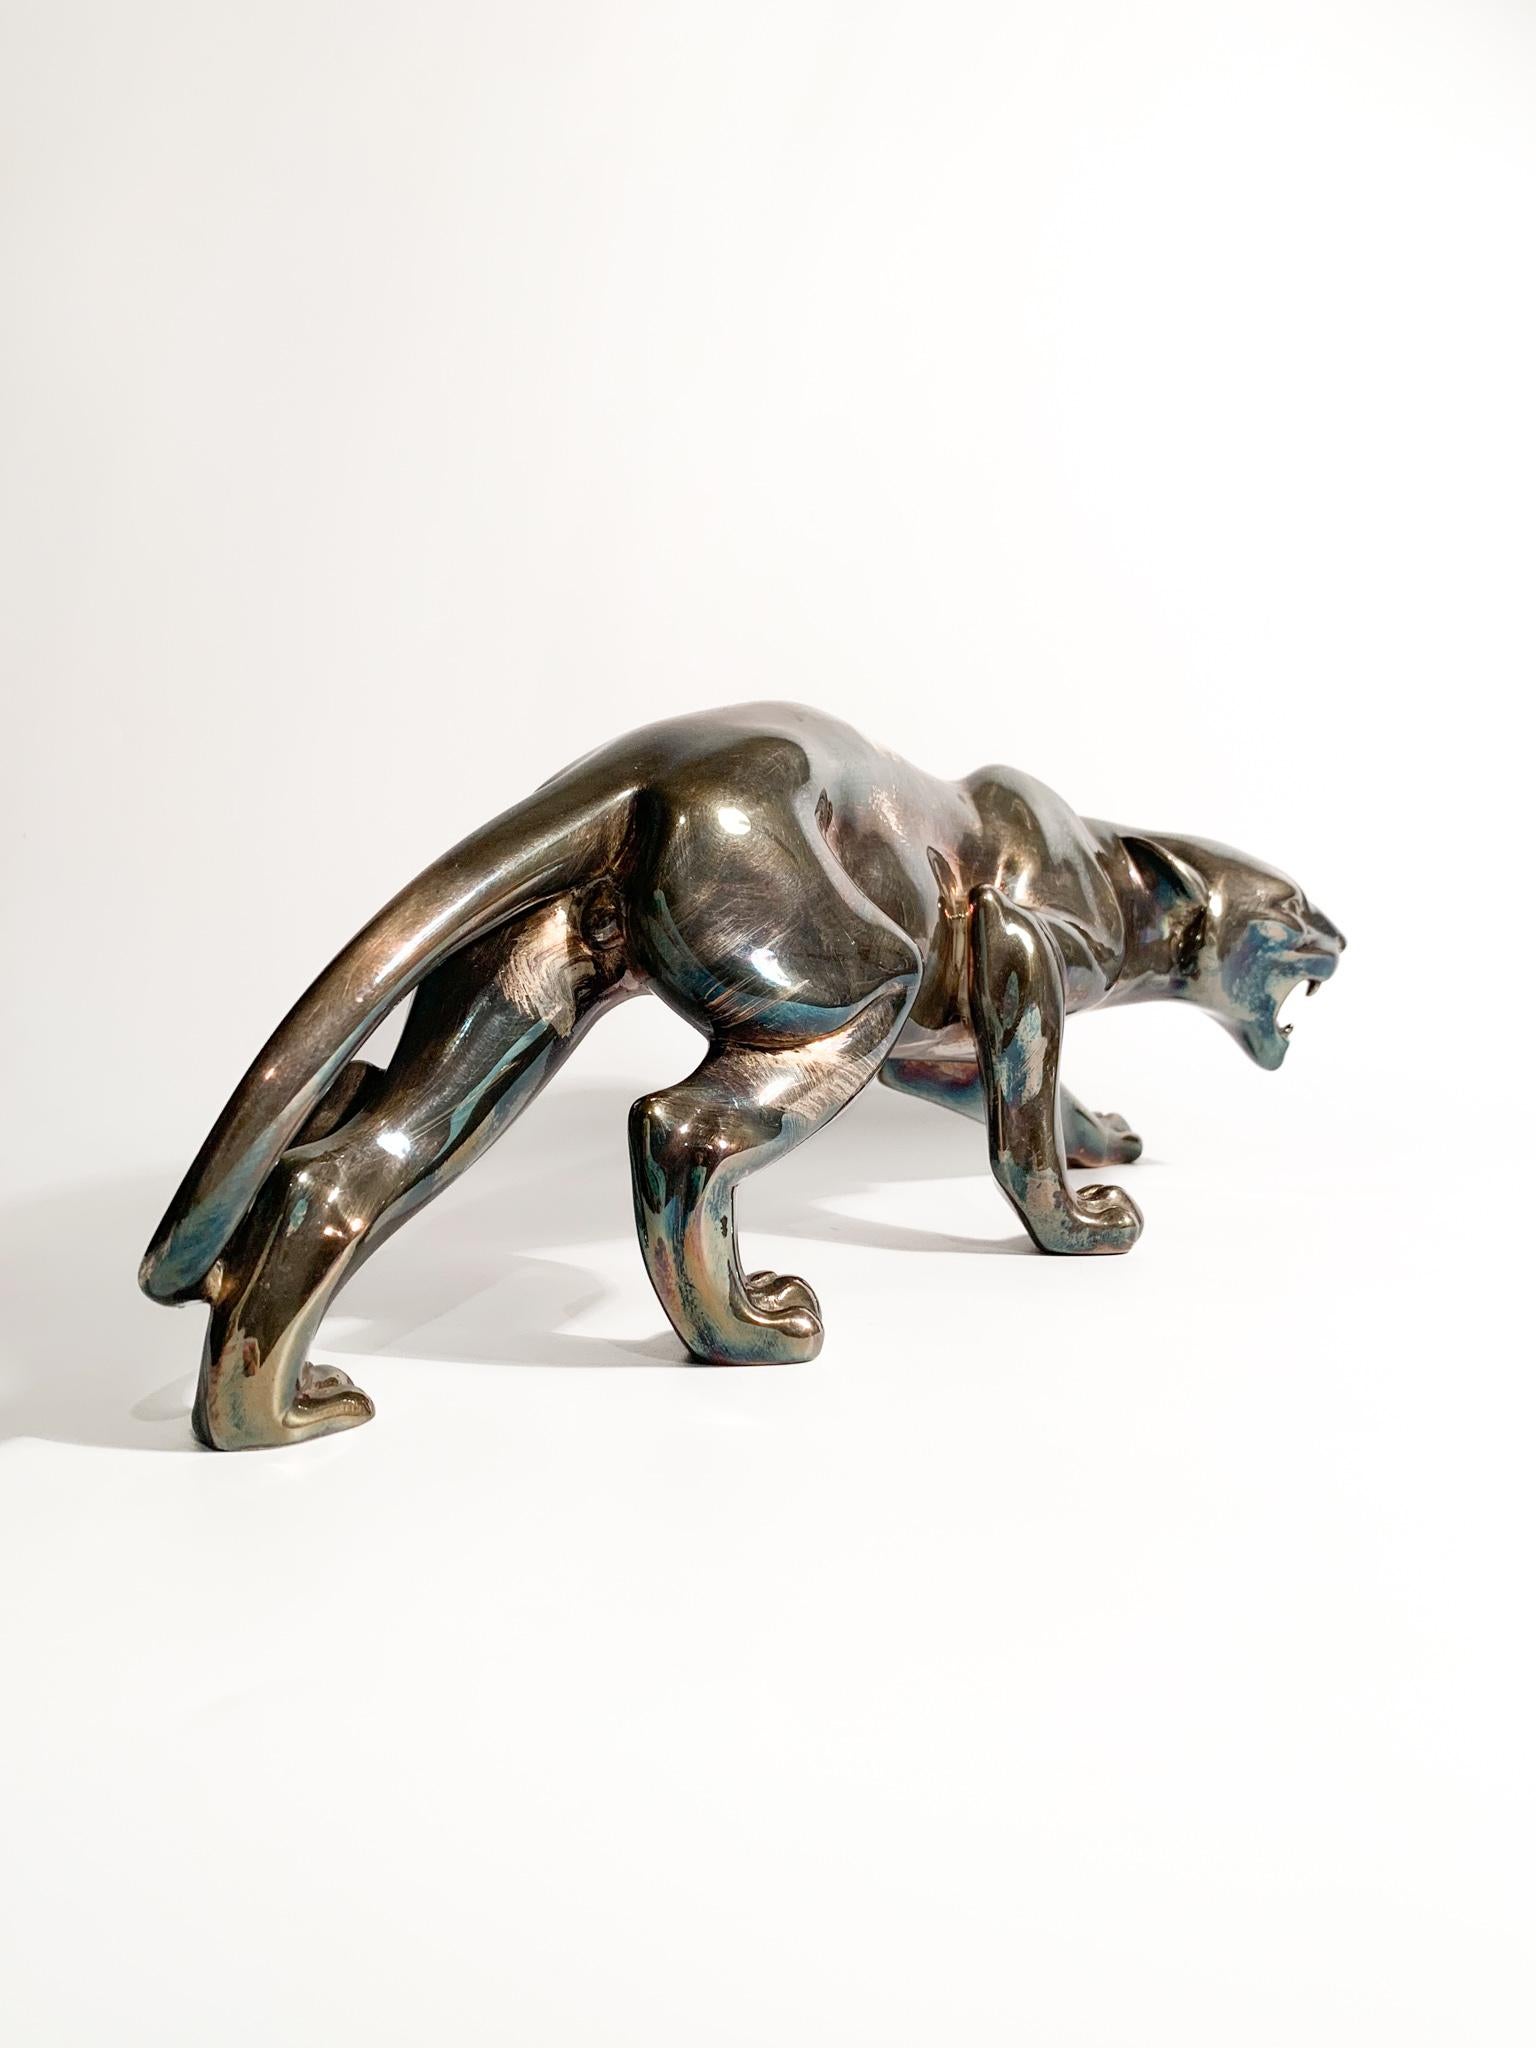 Mid-20th Century French Deco Sculpture of Feline with Silver Casting from the 1930s For Sale